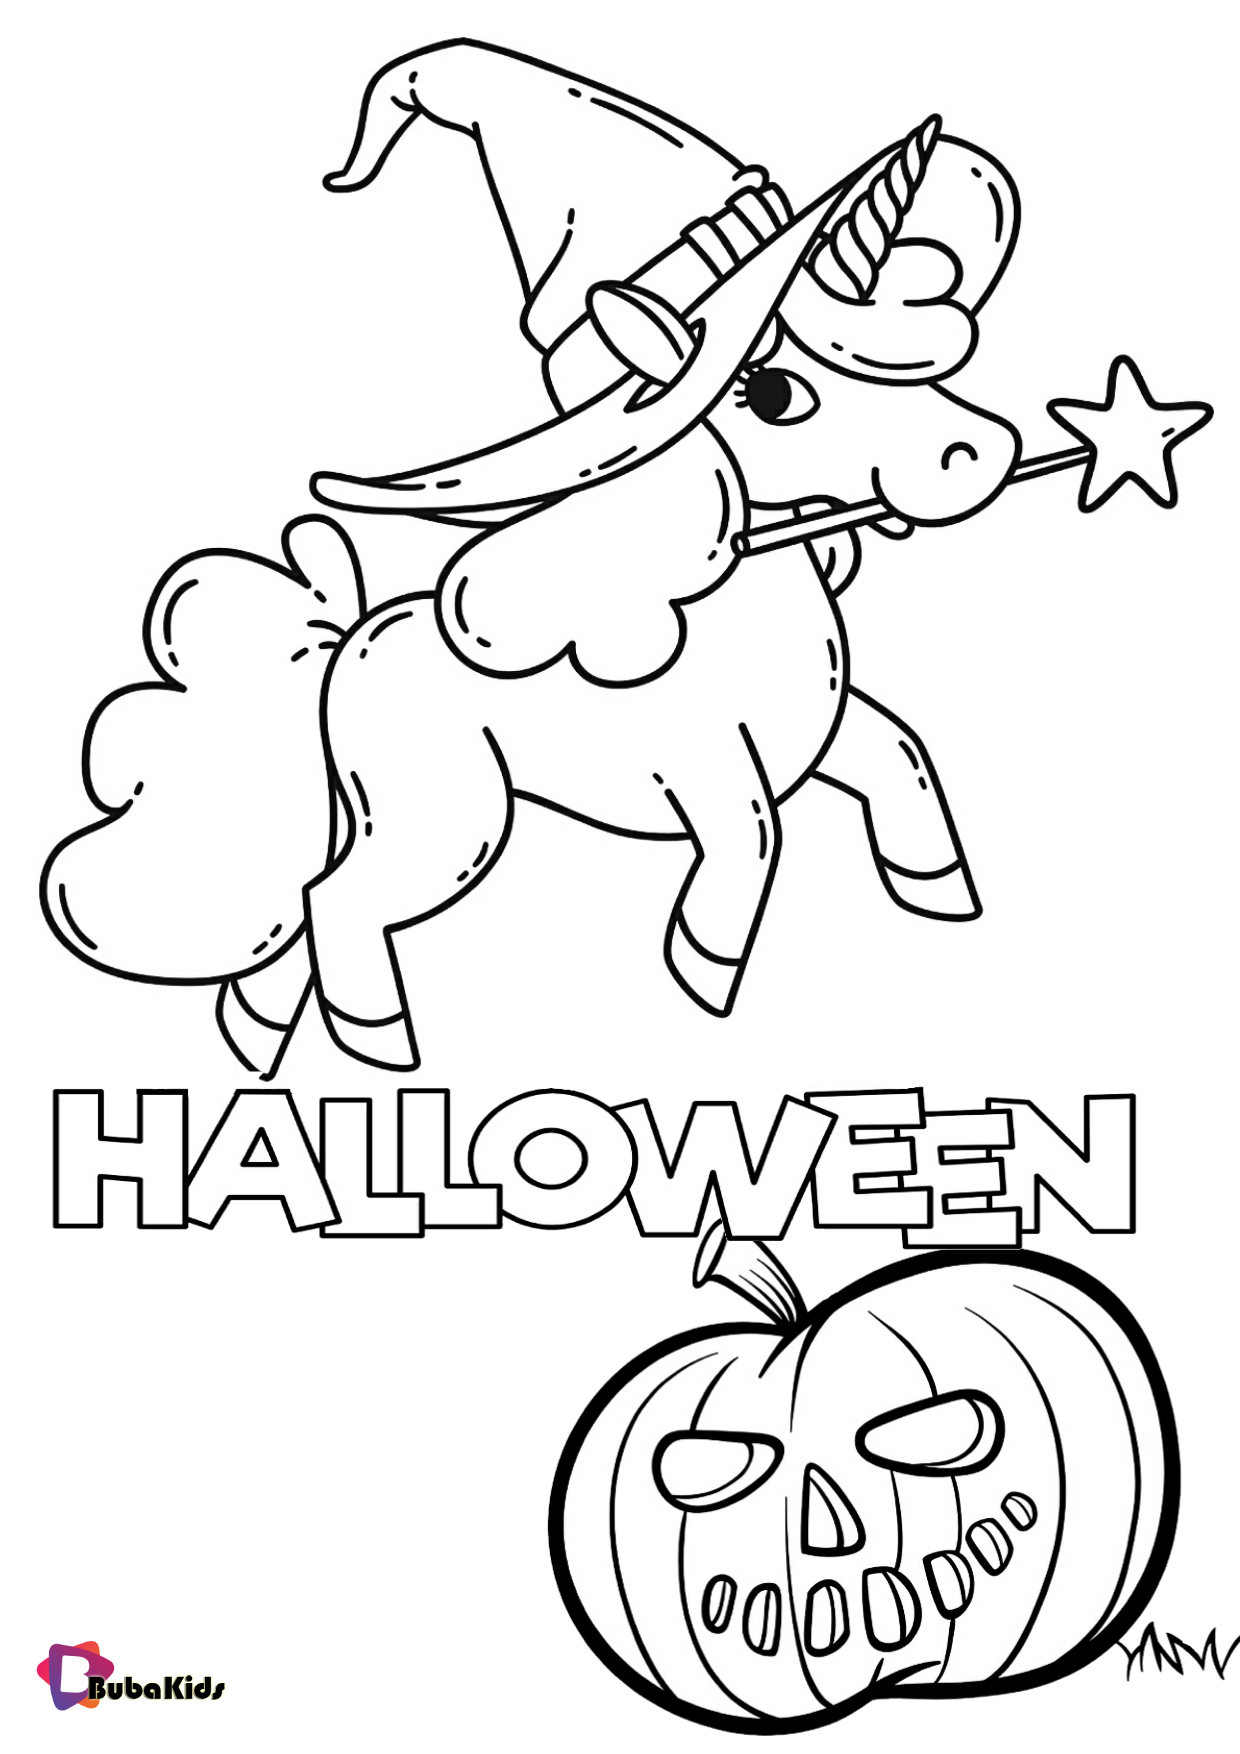 Unicorn and pumpkin Halloween coloring page Wallpaper